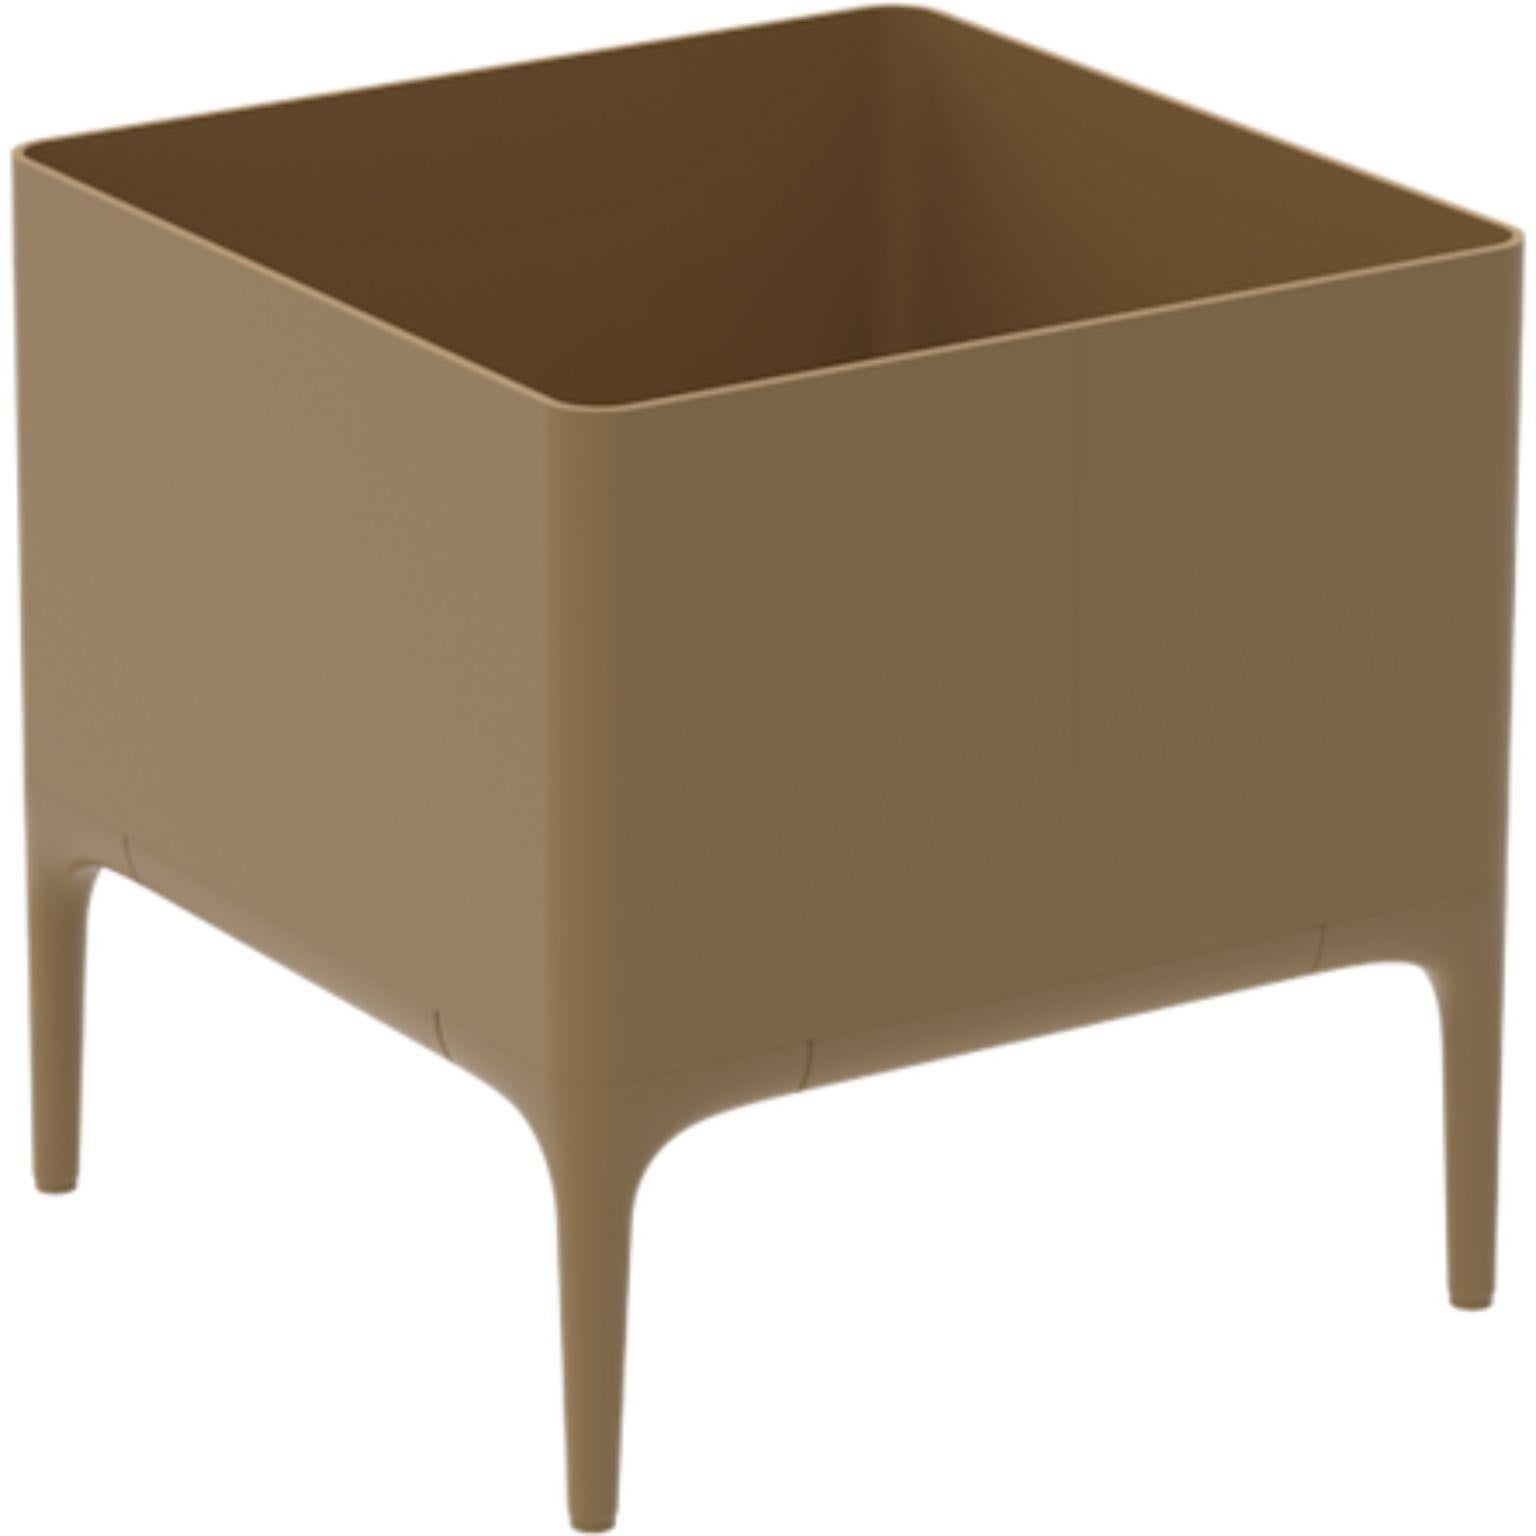 Xaloc gold 45 pot by Mowee
Dimensions: D 45 x W 45 x H 45 cm
Material: Aluminium
Weight: 8 kg
Also available in different colours and finishes.

 Xaloc synthesizes the lines of interior furniture to extrapolate to the exterior, creating an